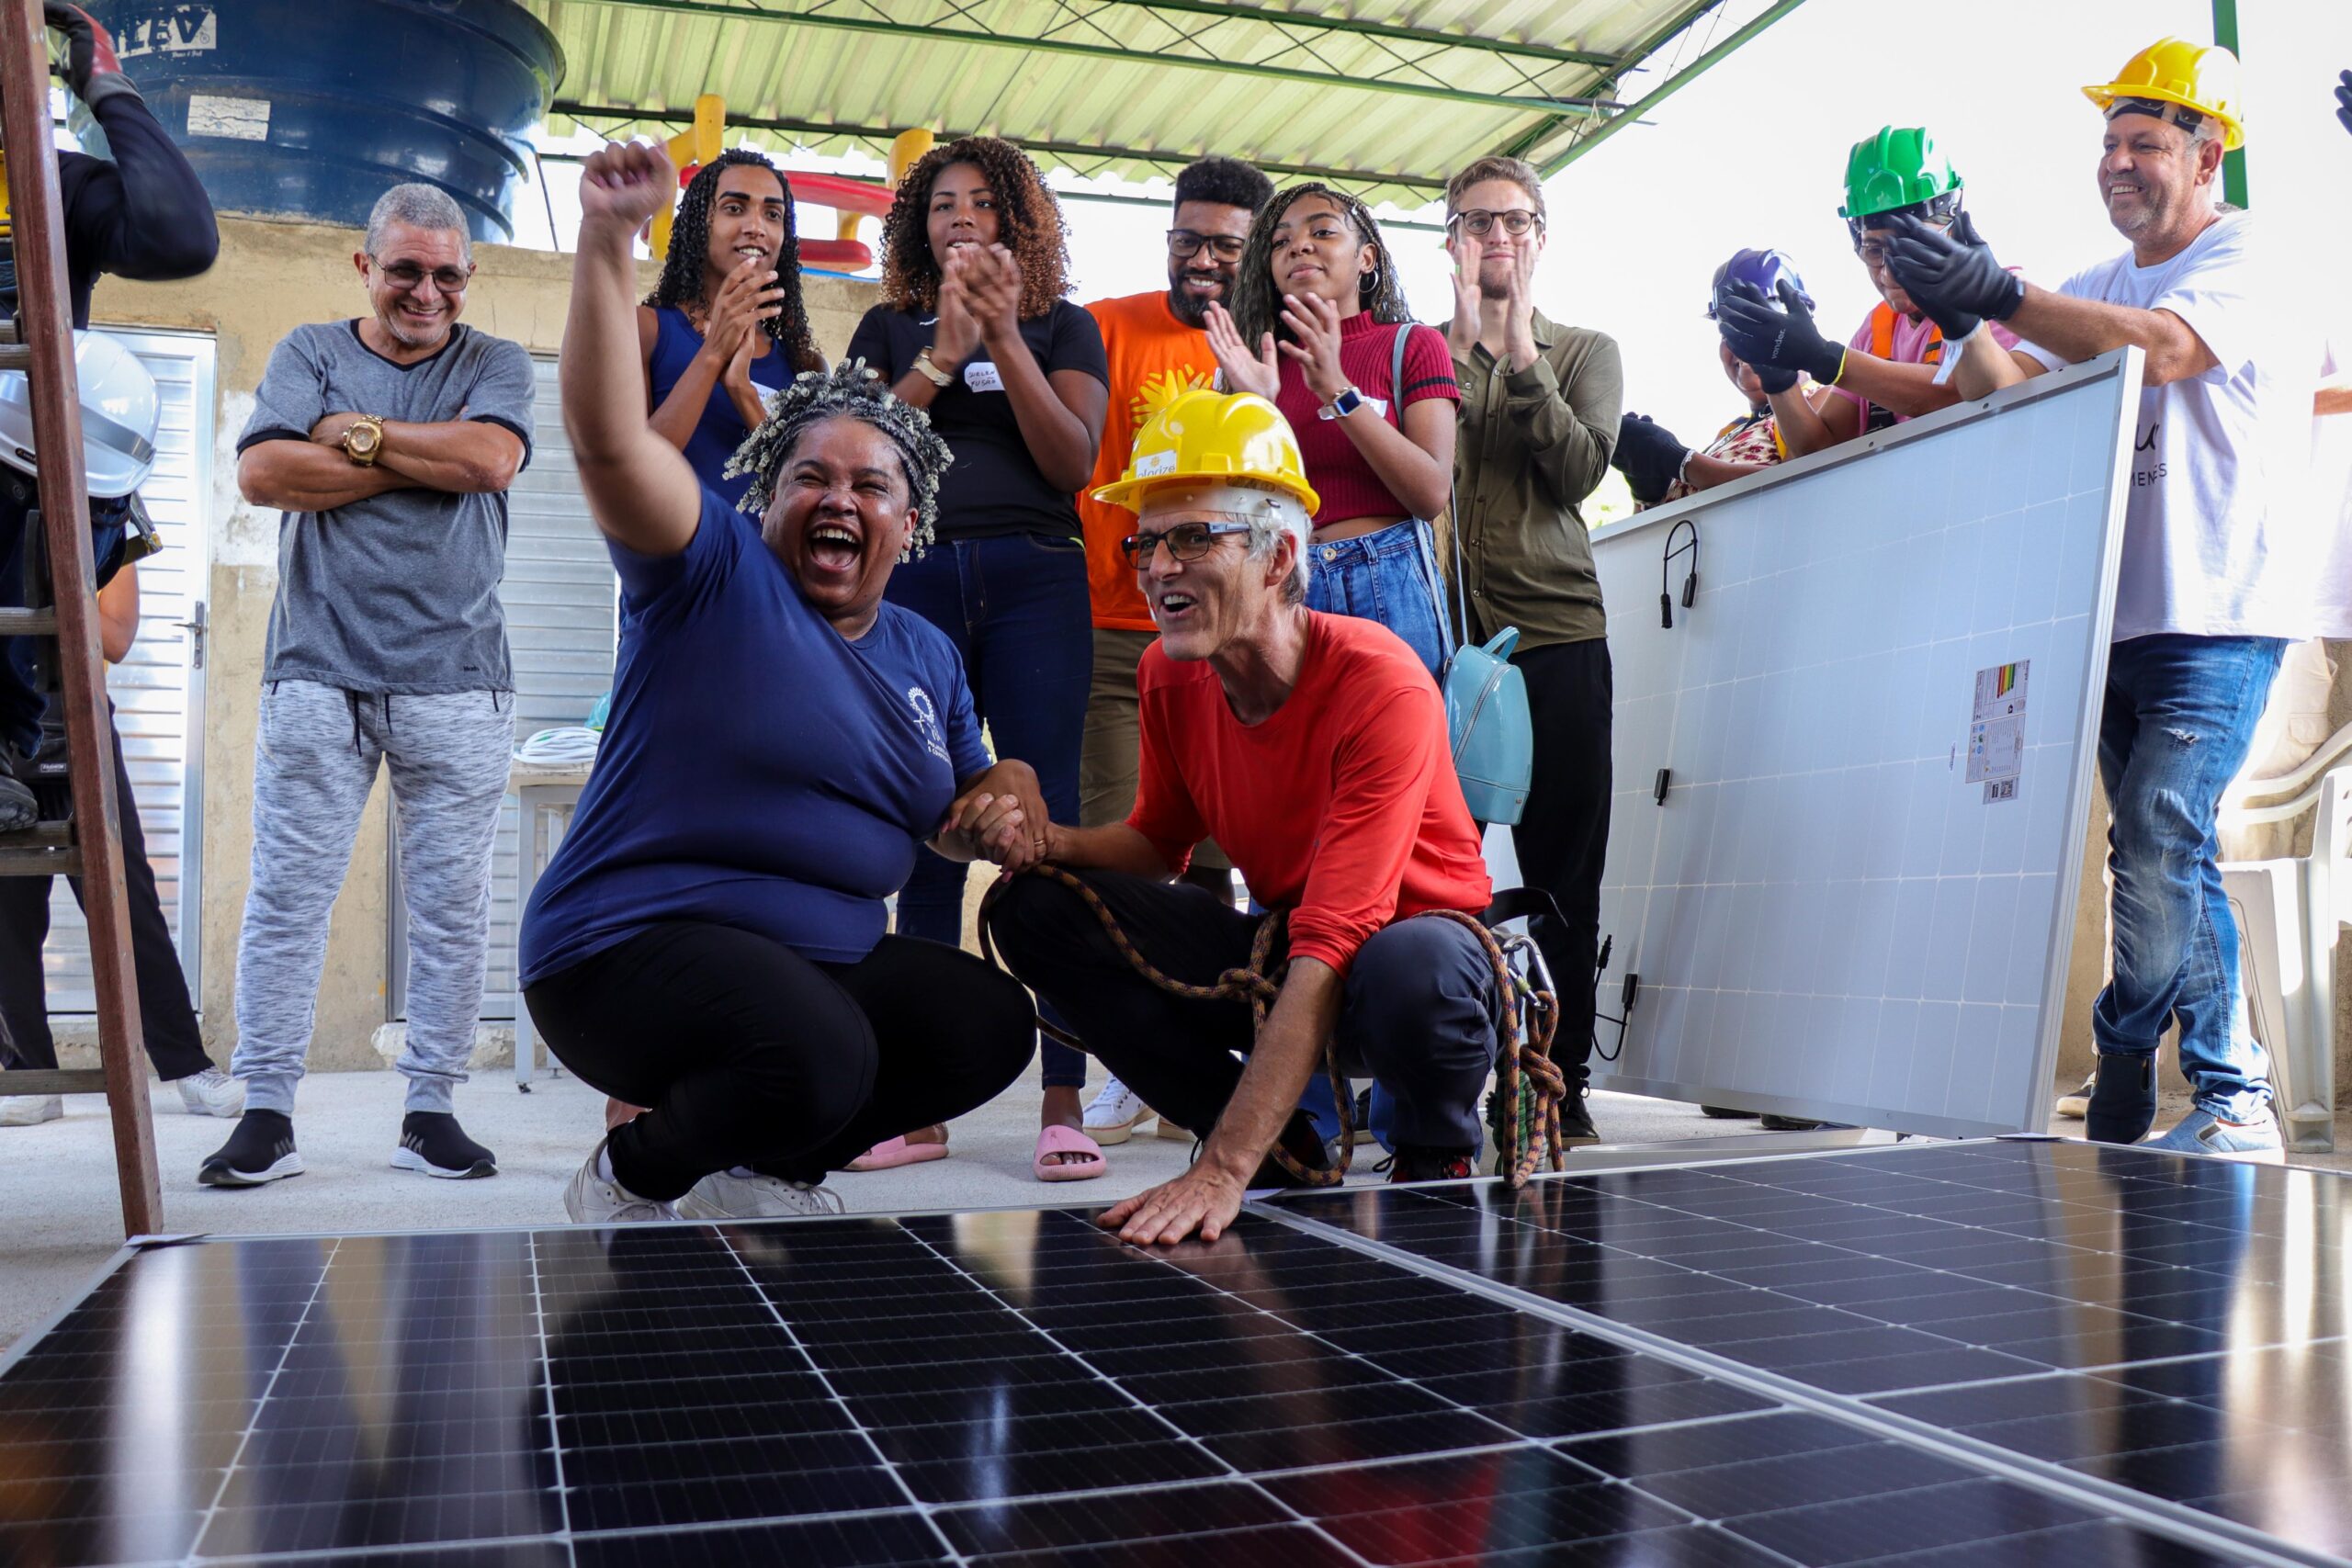 Nill Santos, President of AMAC, celebrates the arrival of the photovoltaic panels at the association’s headquarters alongside Hans Rauschmayer from Solarize. Photo: Alexandre Cerqueira/RioOnWatch